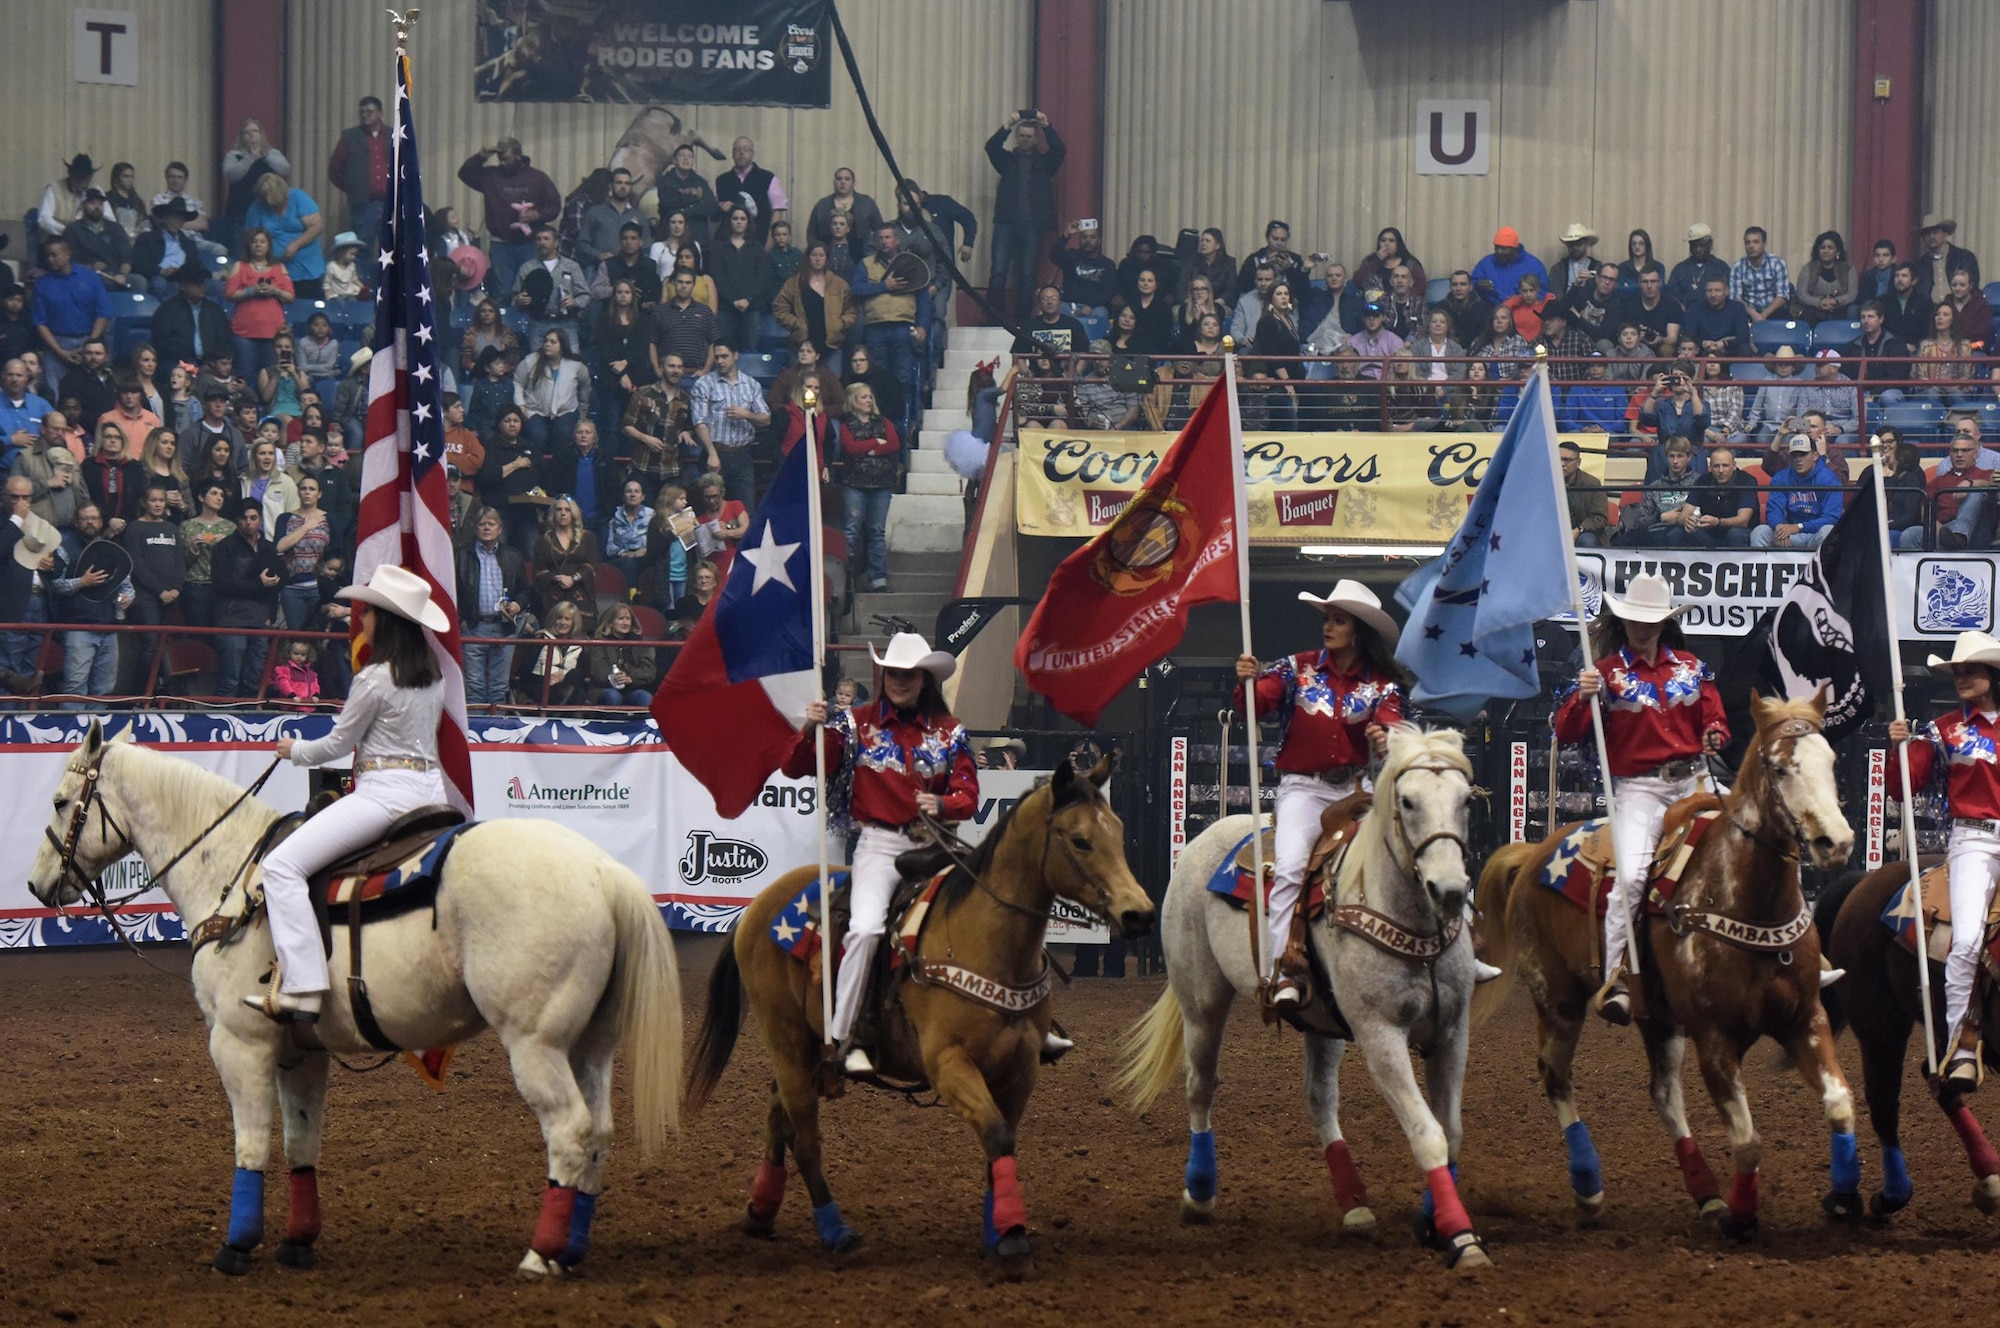 The San Angelo Stock Show and Rodeo Ambassadors Drill Team perform during the 85th Annual San Angelo Stock Show and Rodeo Military Appreciation Night at the Foster Communications Coliseum in San Angelo, Texas, Feb. 15, 2017. They carried patriotic flags during the drill. (U.S. Air Force photo by Staff Sgt. Laura R. McFarlane/Released)